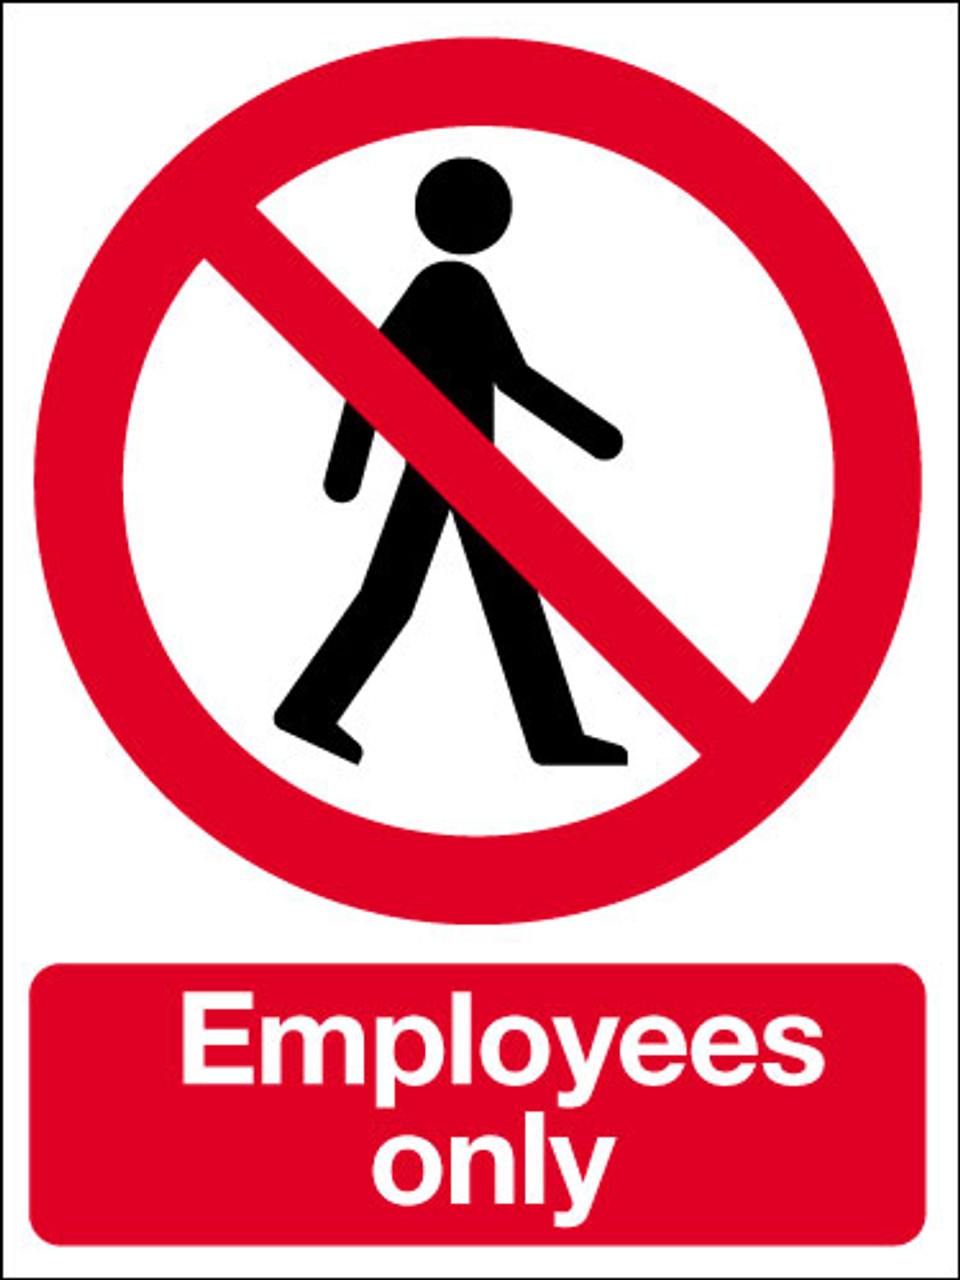 Employees only sign